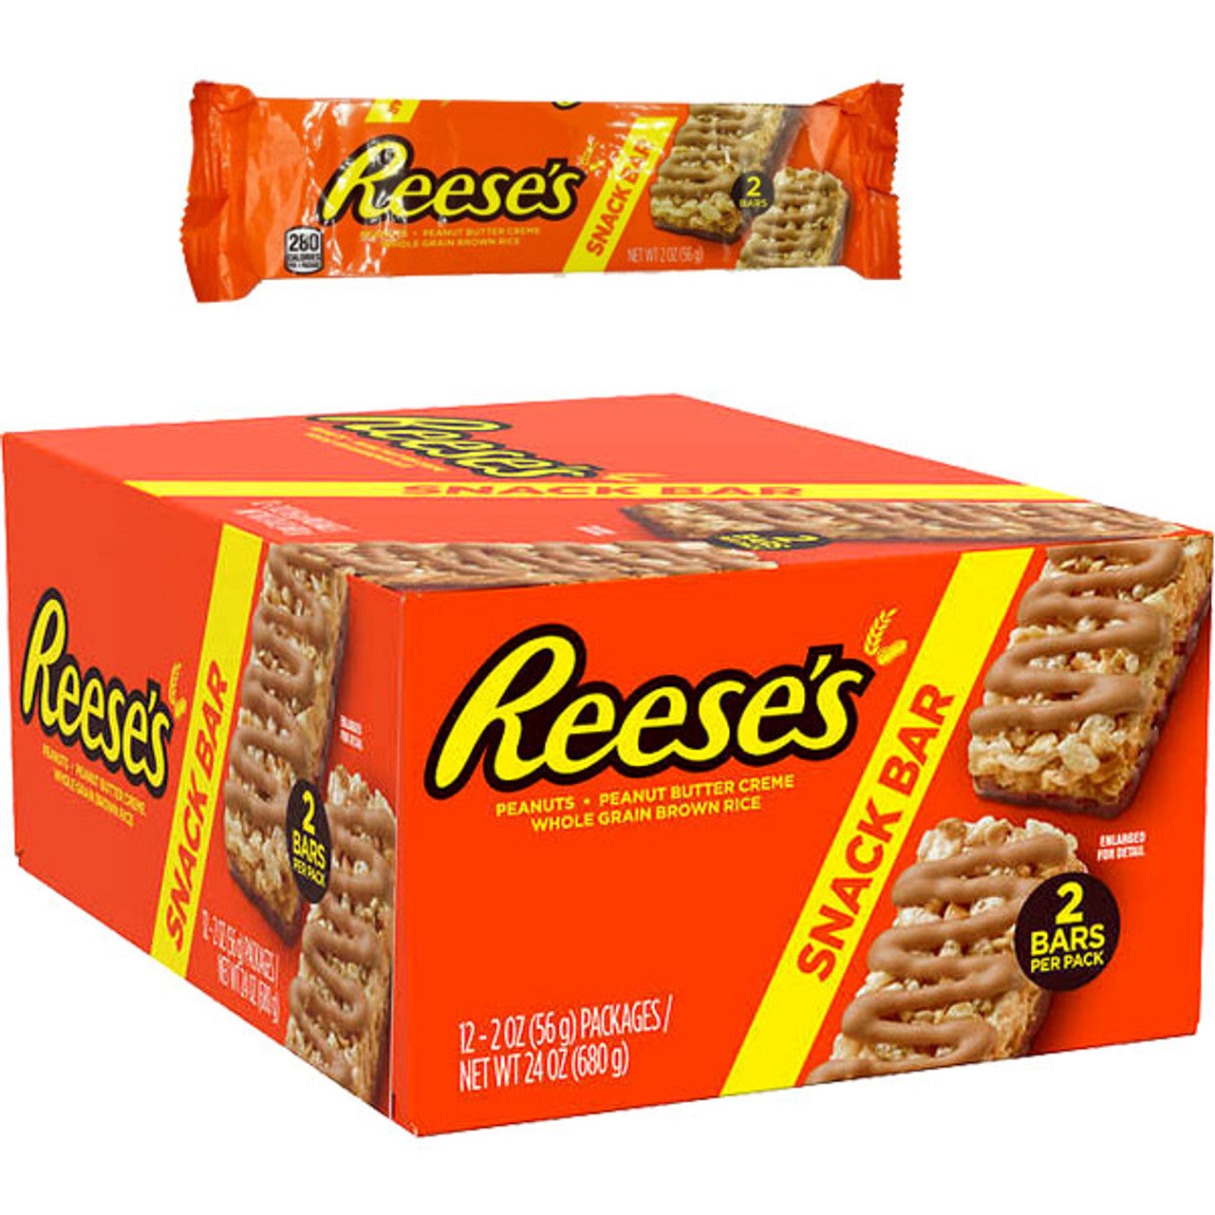 Reese's Snack Bar Peanut Butter Creme 2oz - 12ct